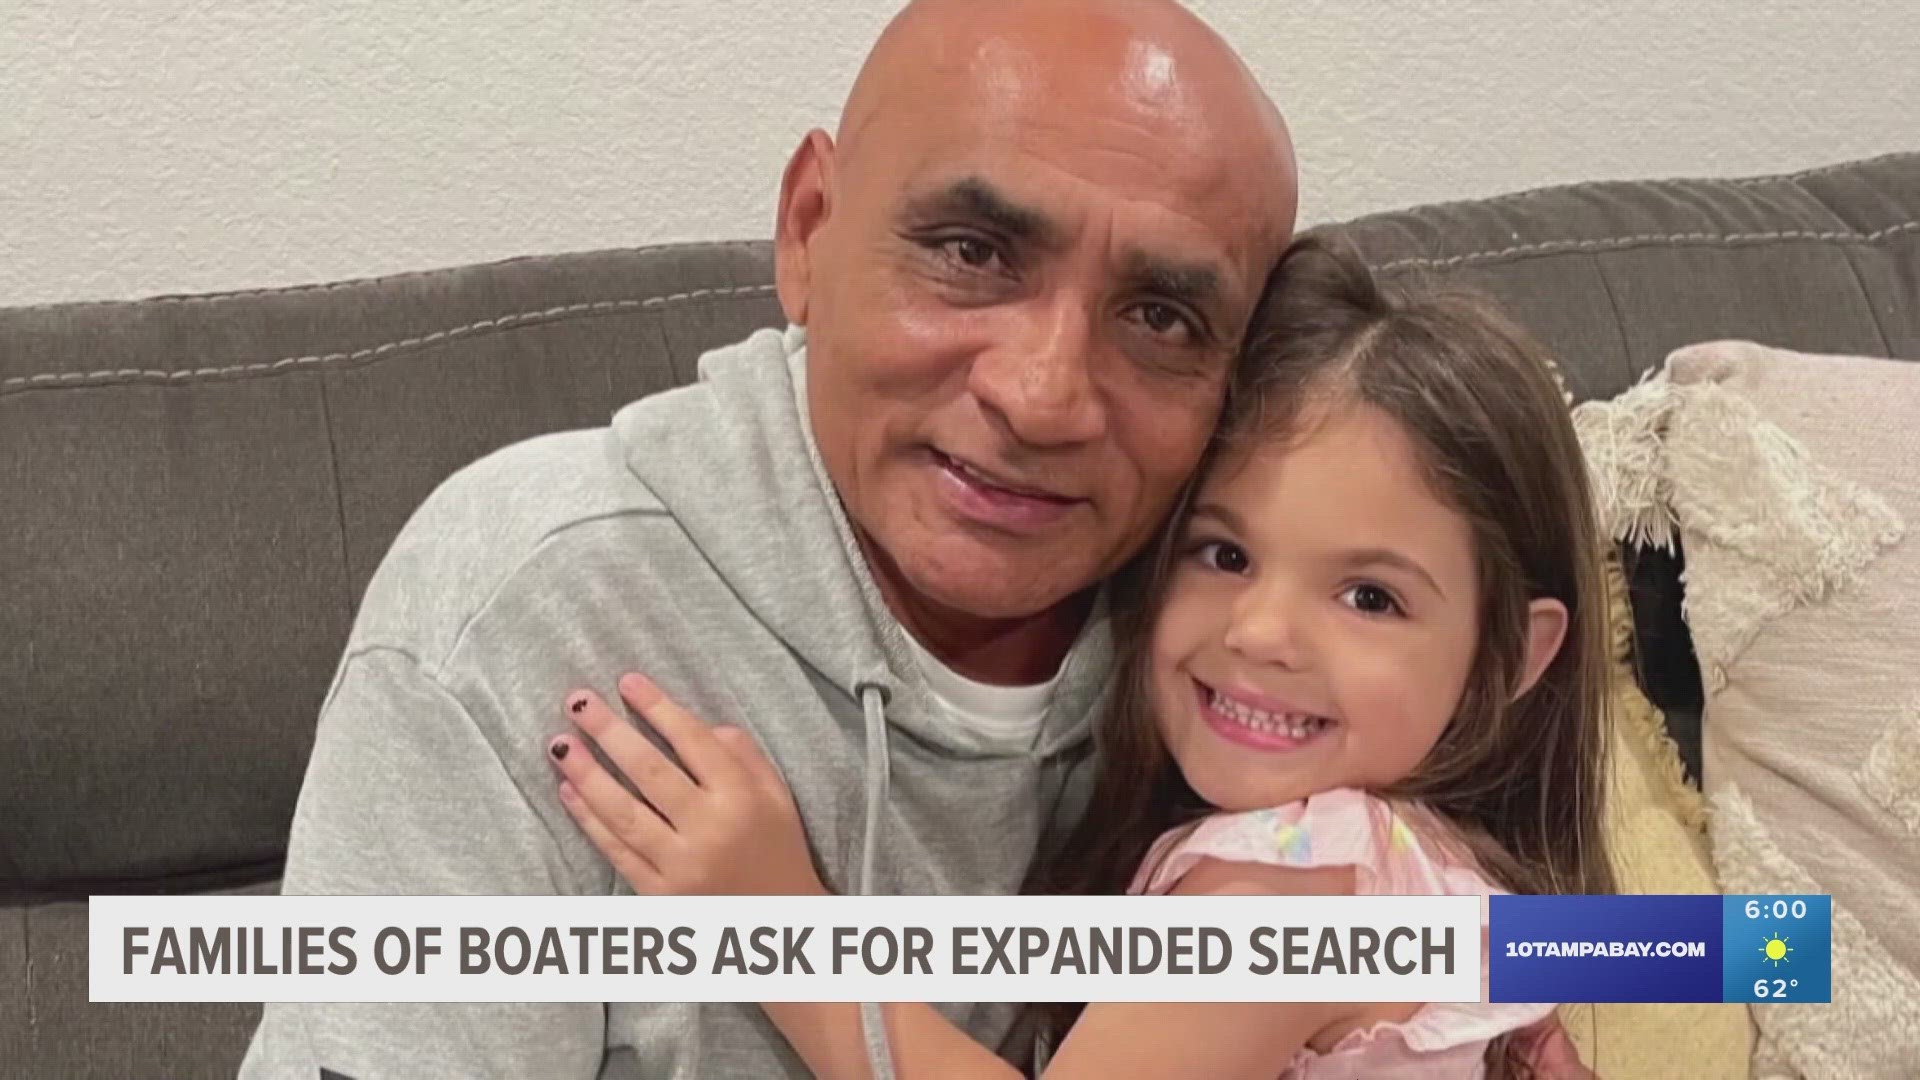 The families said the Coast Guard stopped the search too soon as they believe the missing boaters are now as far south as Key West.